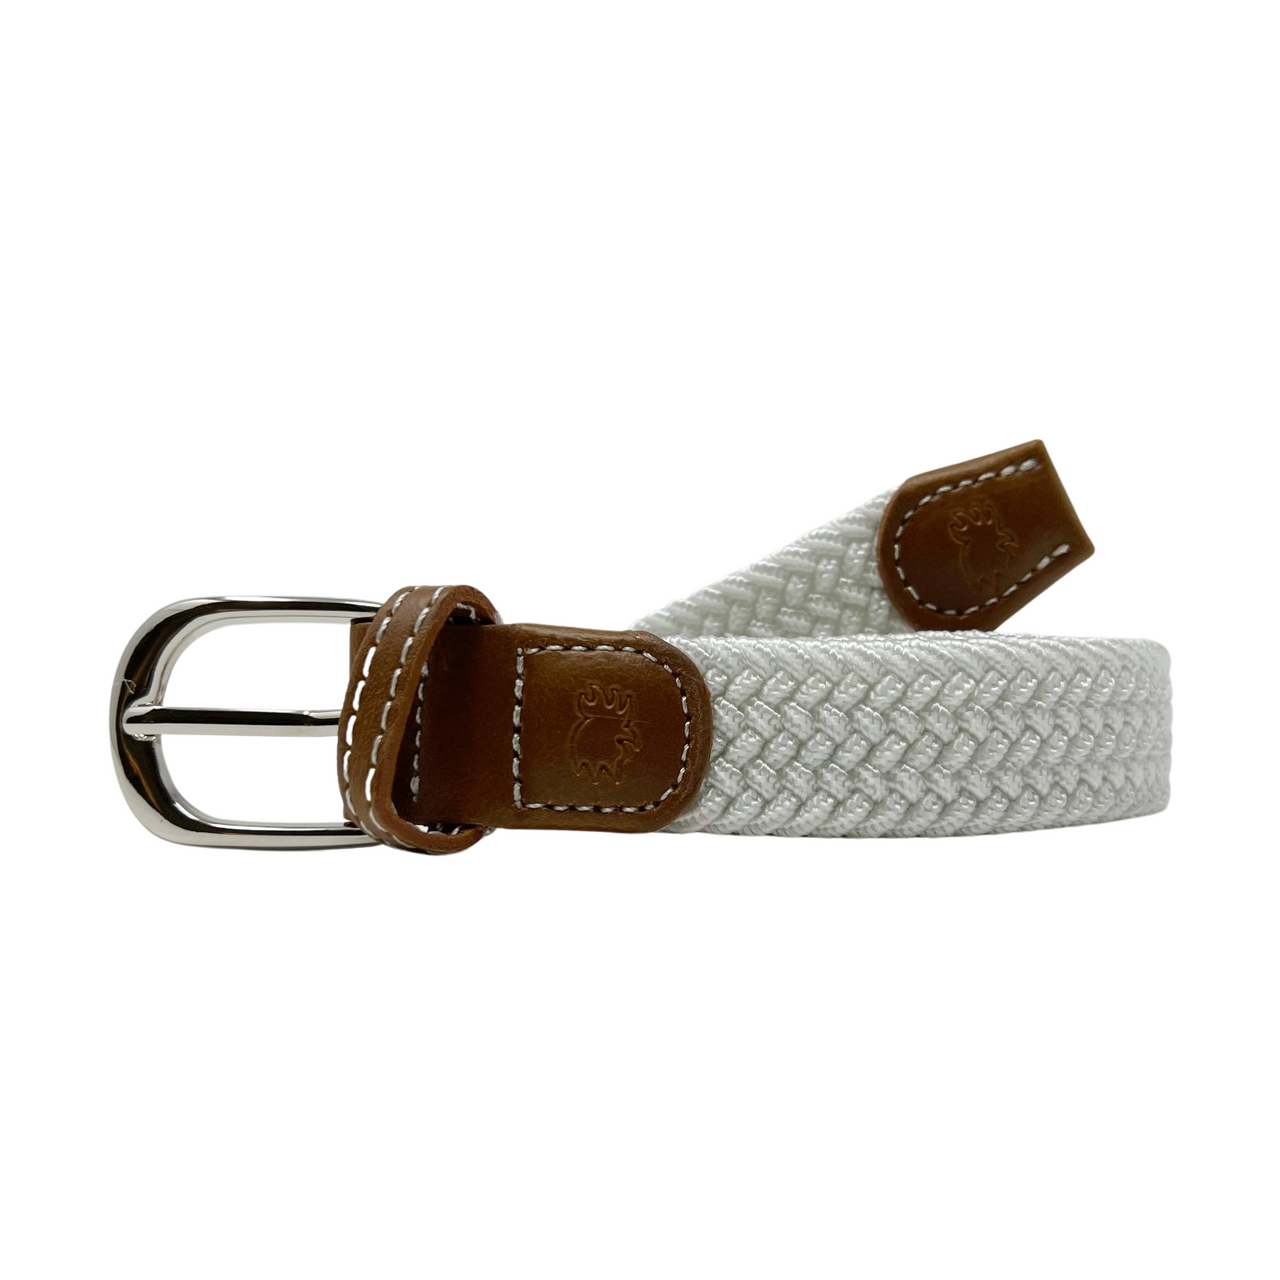 Braided Brown Leather and Cotton Belt